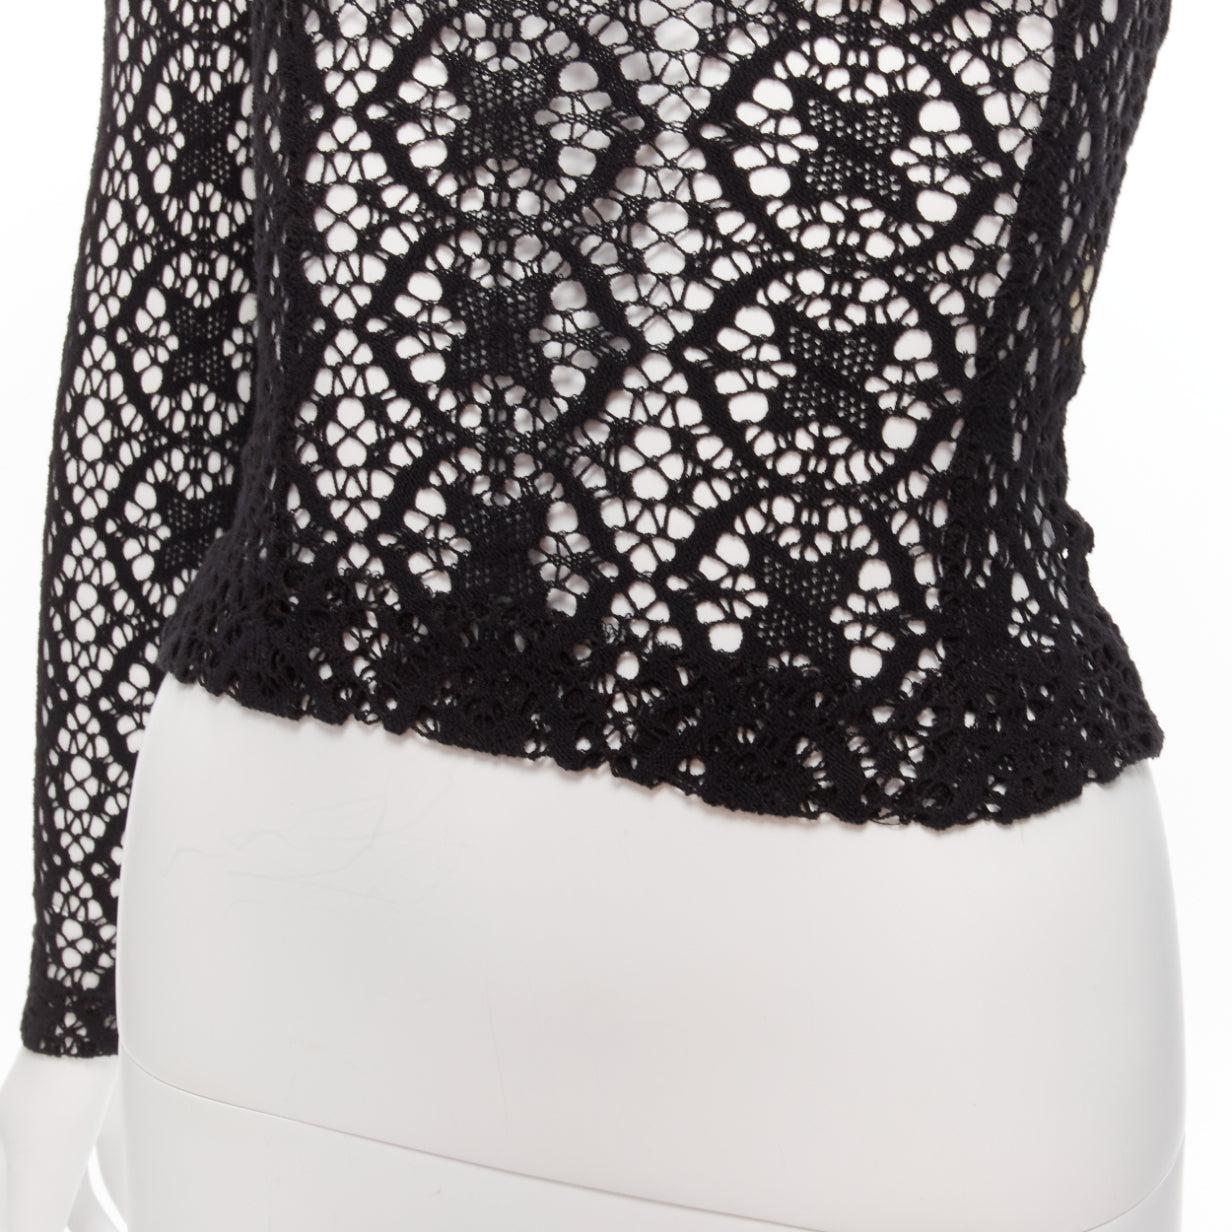 DOLCE GABBANA Vintage black cotton floral lattice lace sheer long sleeve top IT38 XS
Reference: GIYG/A00329
Brand: Dolce Gabbana
Designer: Domenico Dolce and Stefano Gabbana
Material: Cotton, Blend
Color: Black, Brown
Pattern: Lace
Closure: